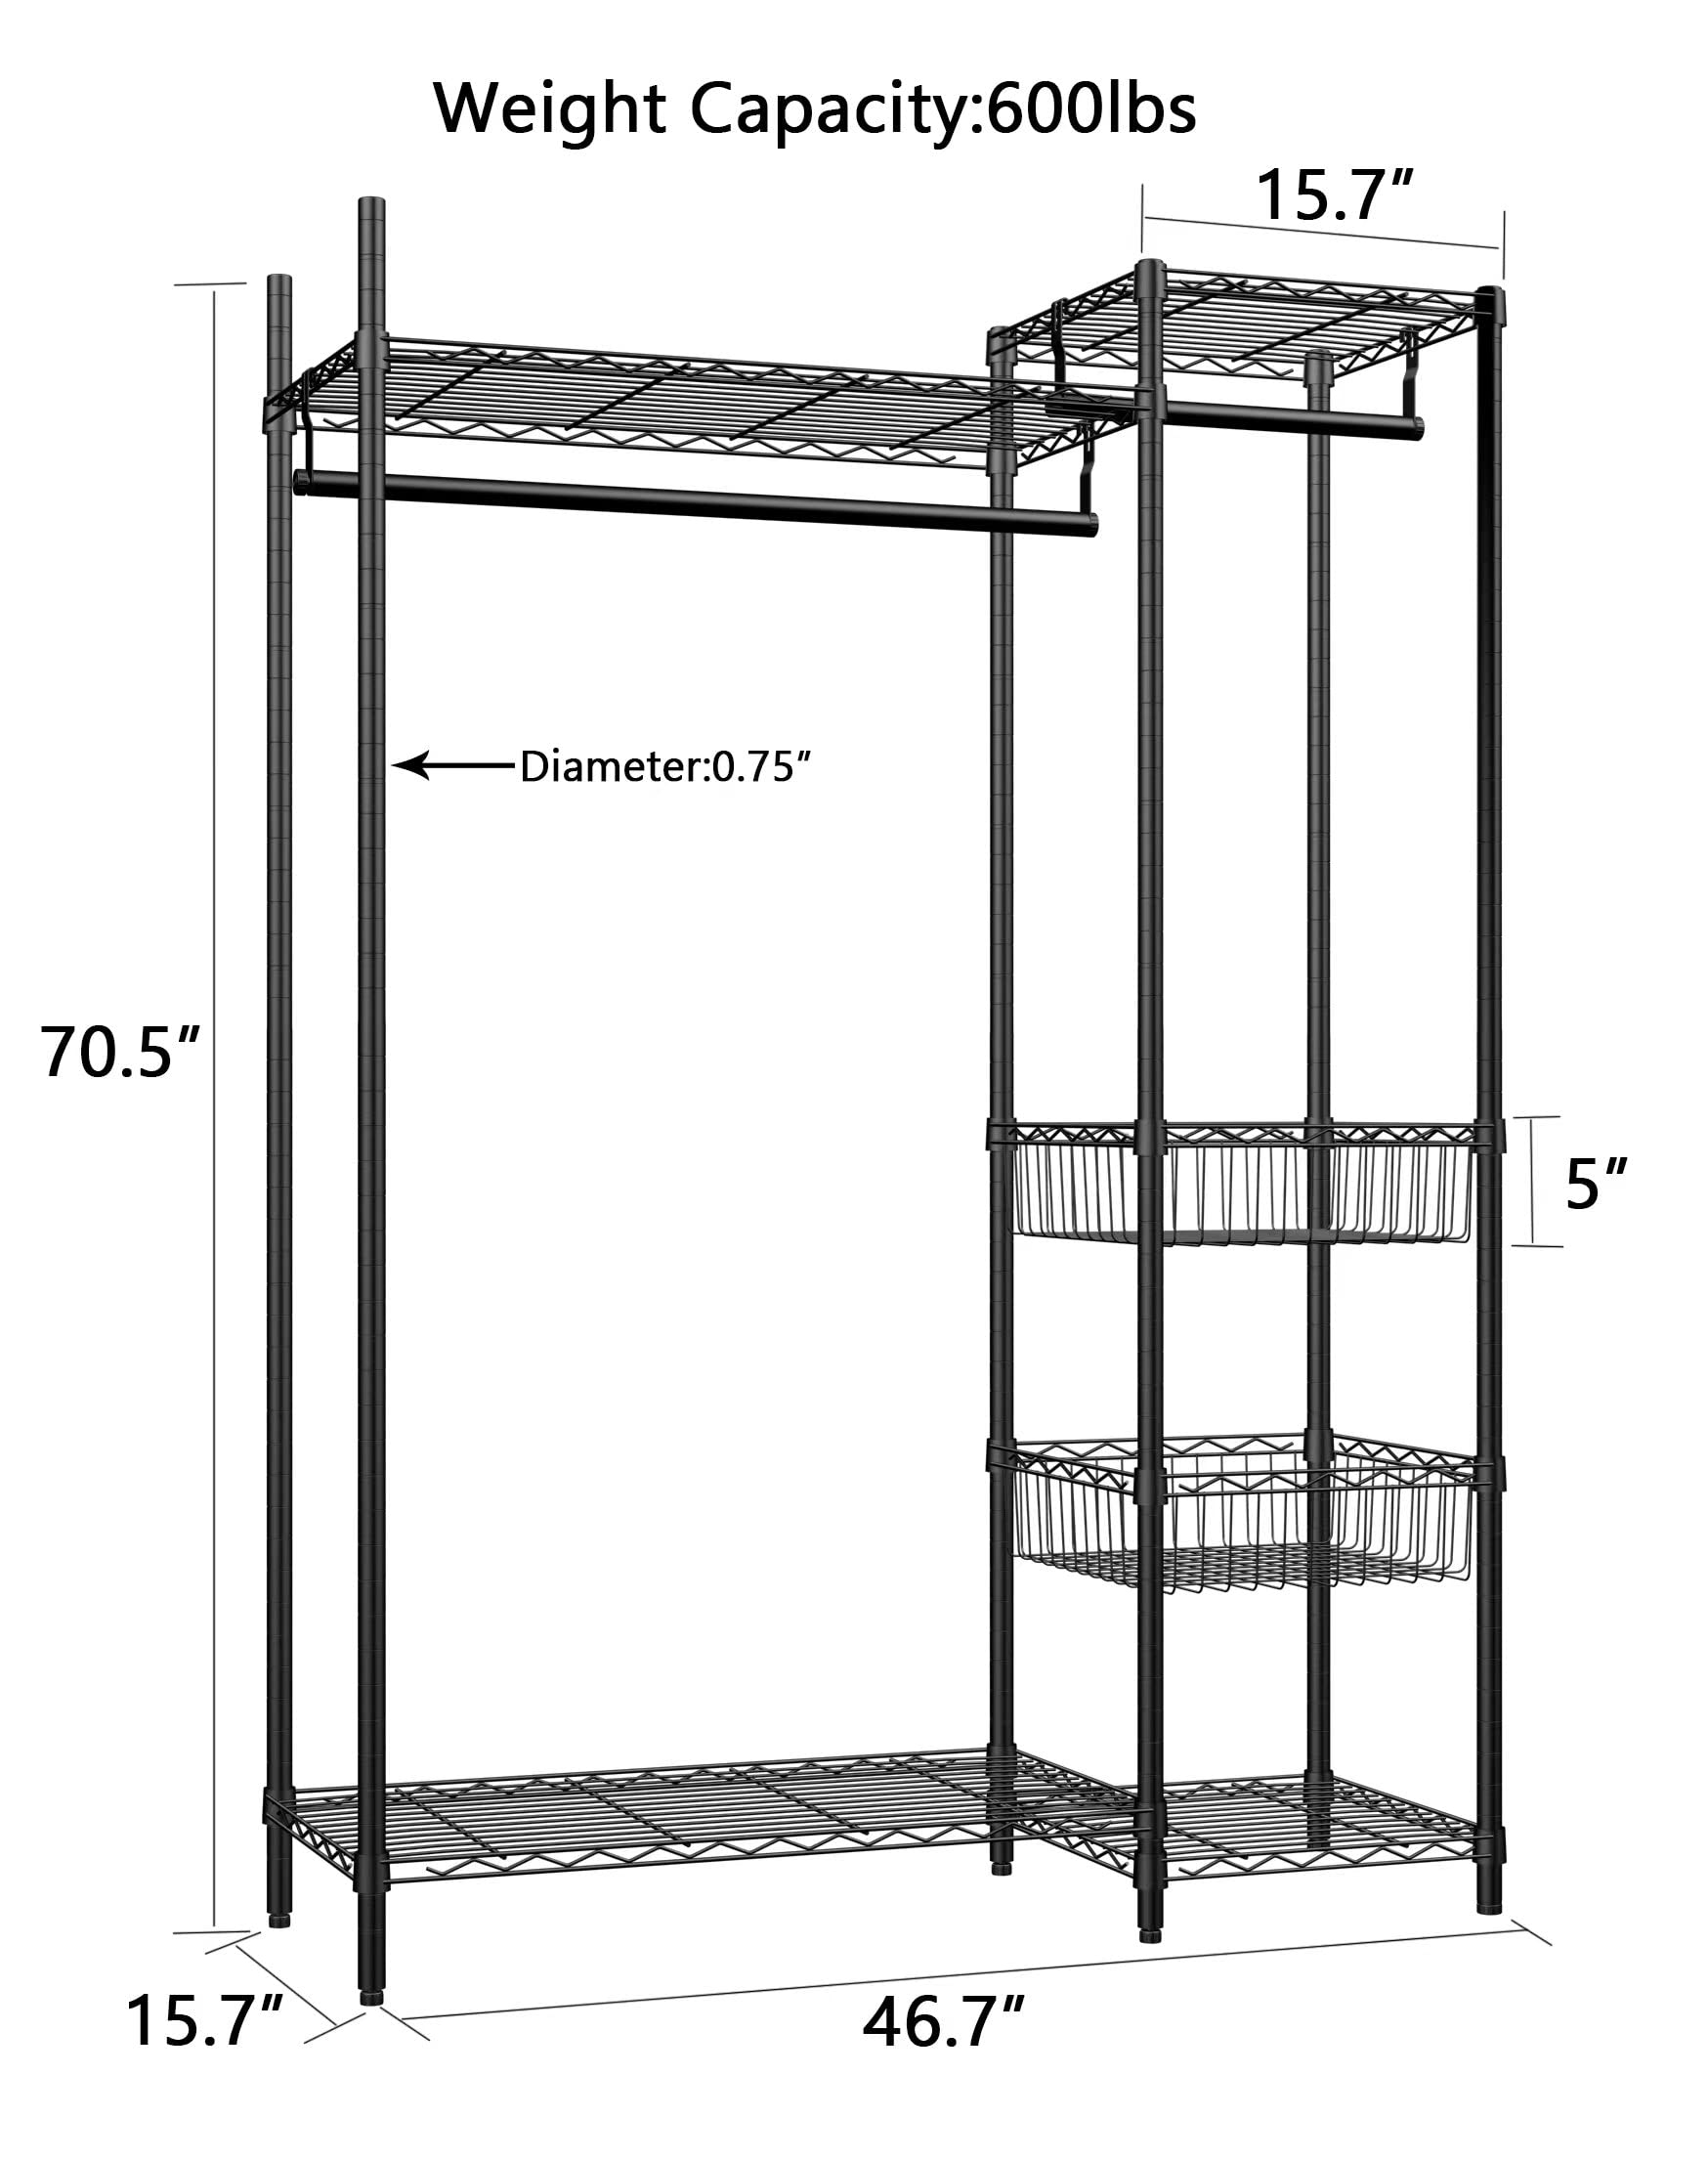 Xiofio 6 Tiers Heavy Duty Garment Rack,Clothing Storage Organizer,Metal Clothing Rack, Adjustable Clothing Rack with Hanging Rod and Wire Fixing Baskets,46.7"L x 15.7"W x 70.5"H Max Load 600LBS,Black